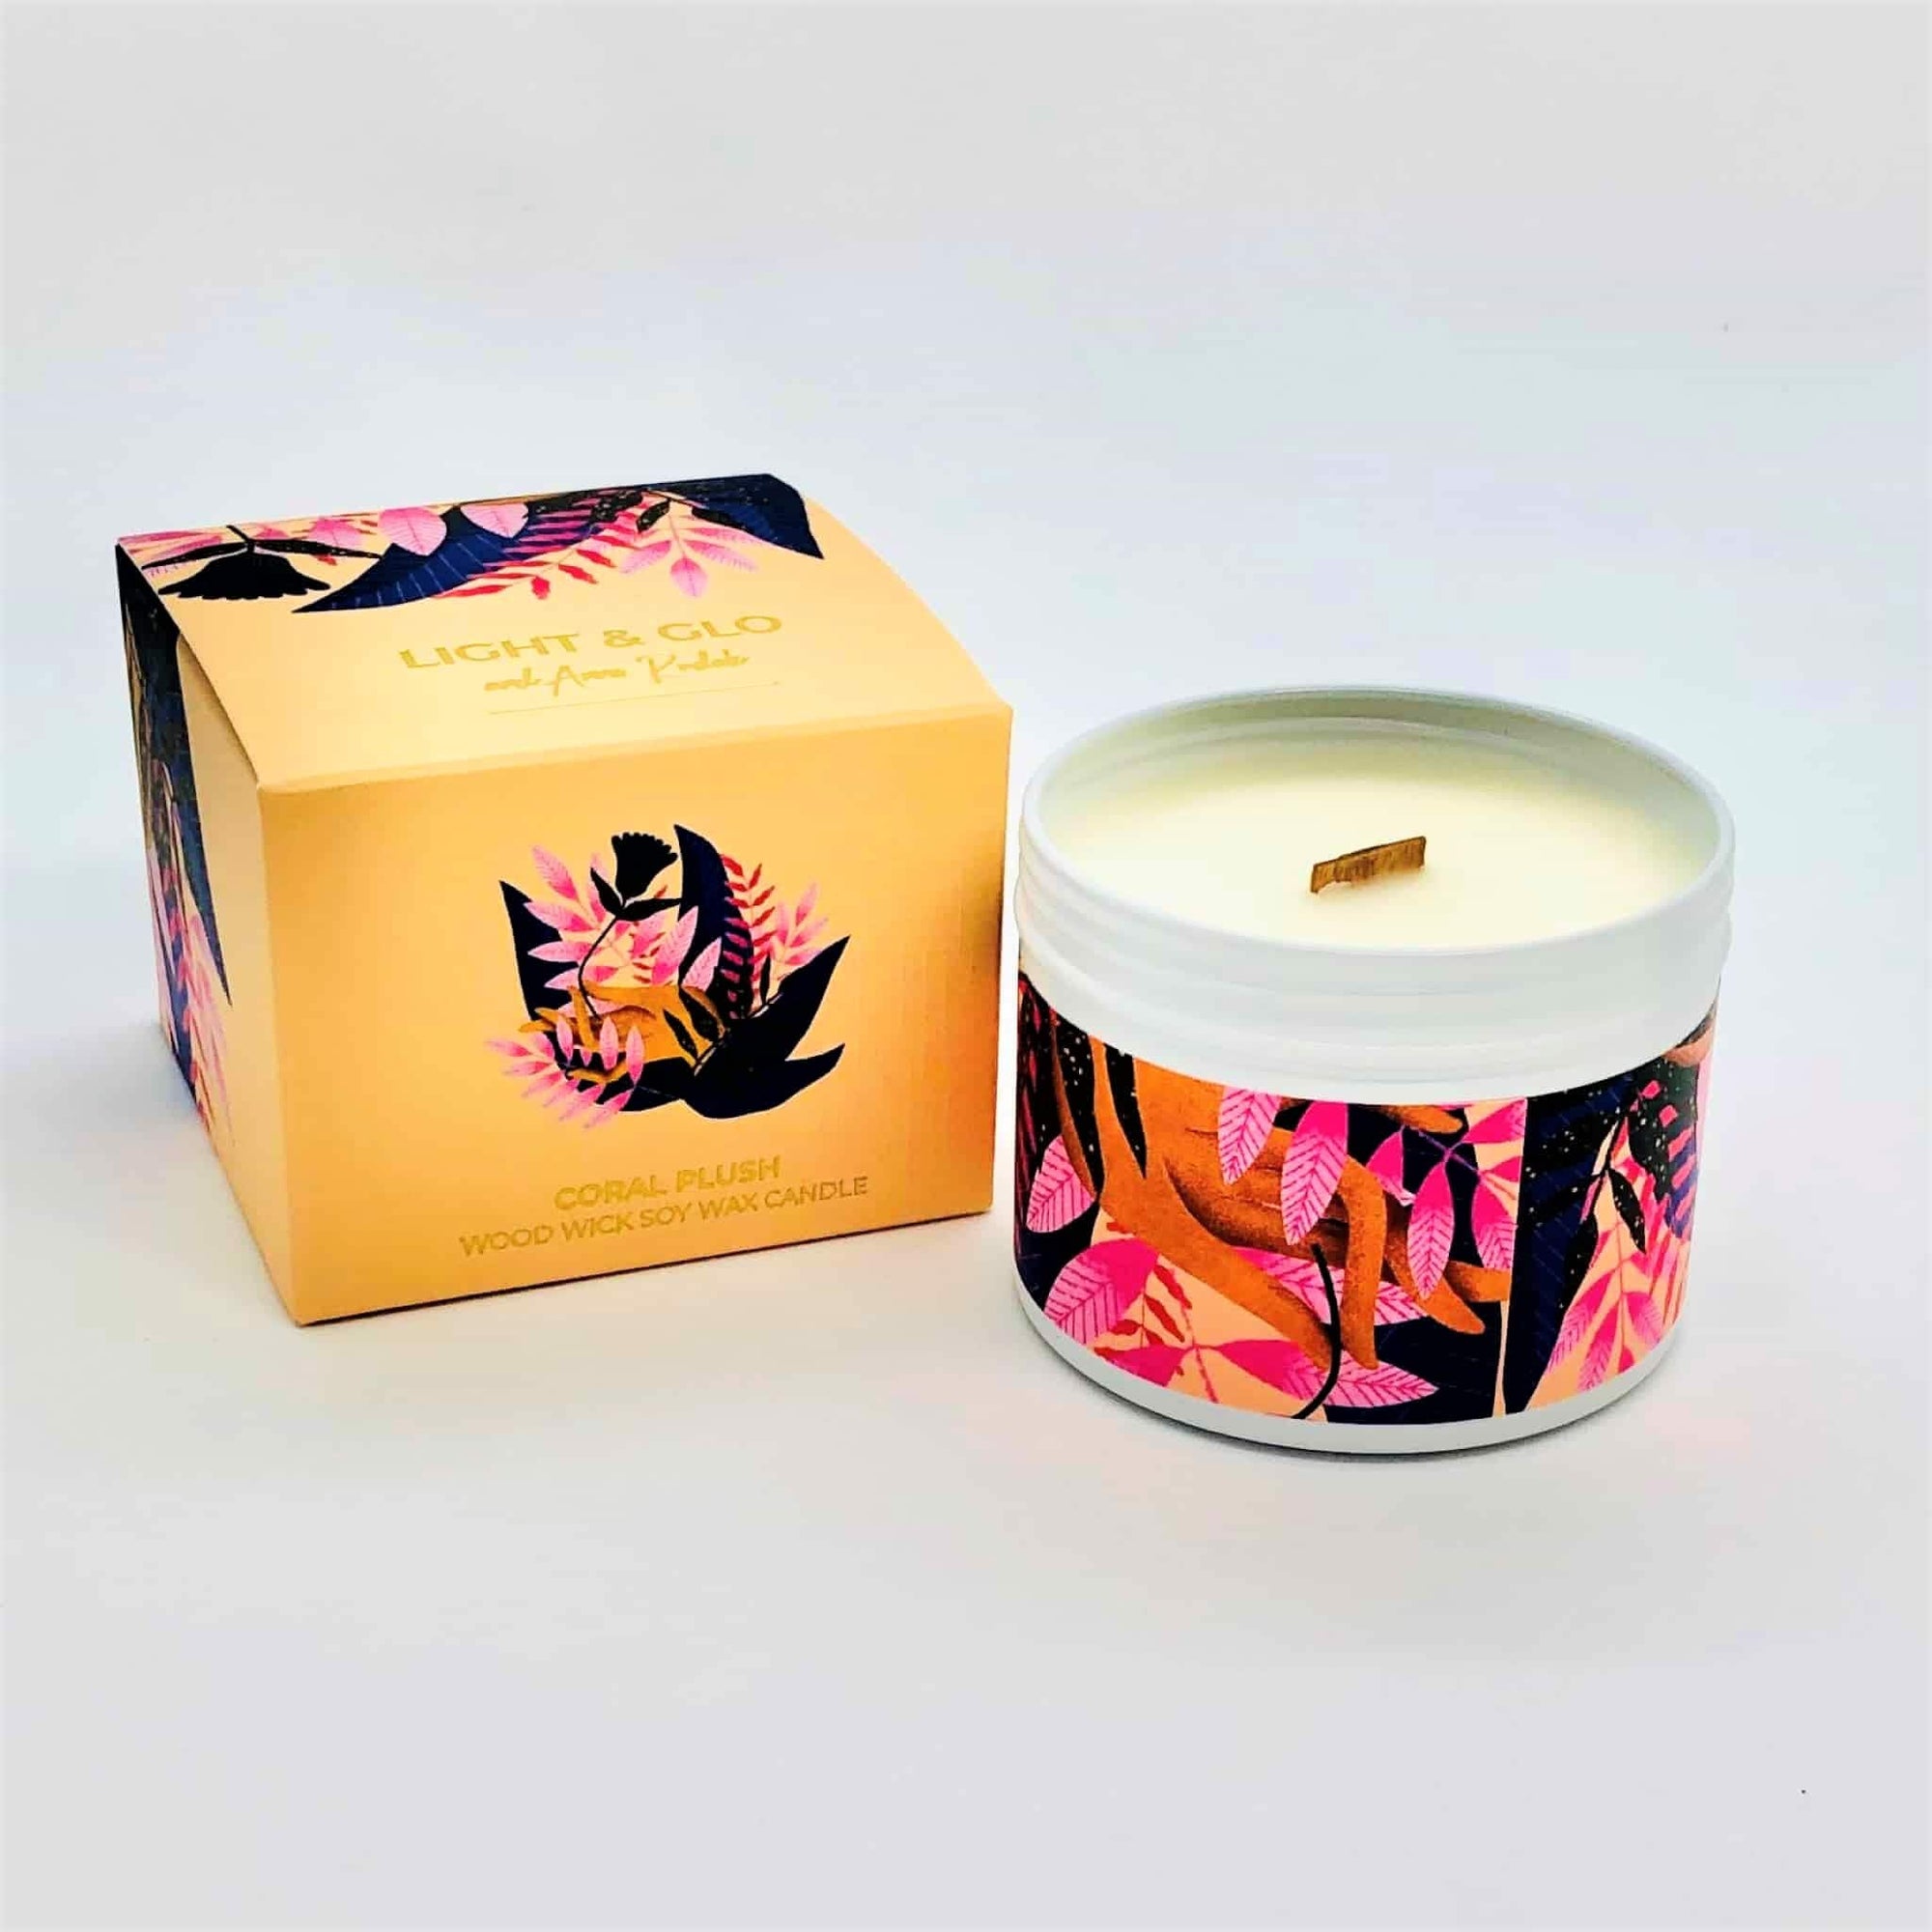 Pure soy wax candle with wood wick in handy white travel tin in Sweet Serenity fragrance. Compact size and both tin and box in soft pink and decorated in abstract floral motif of reds and orange.